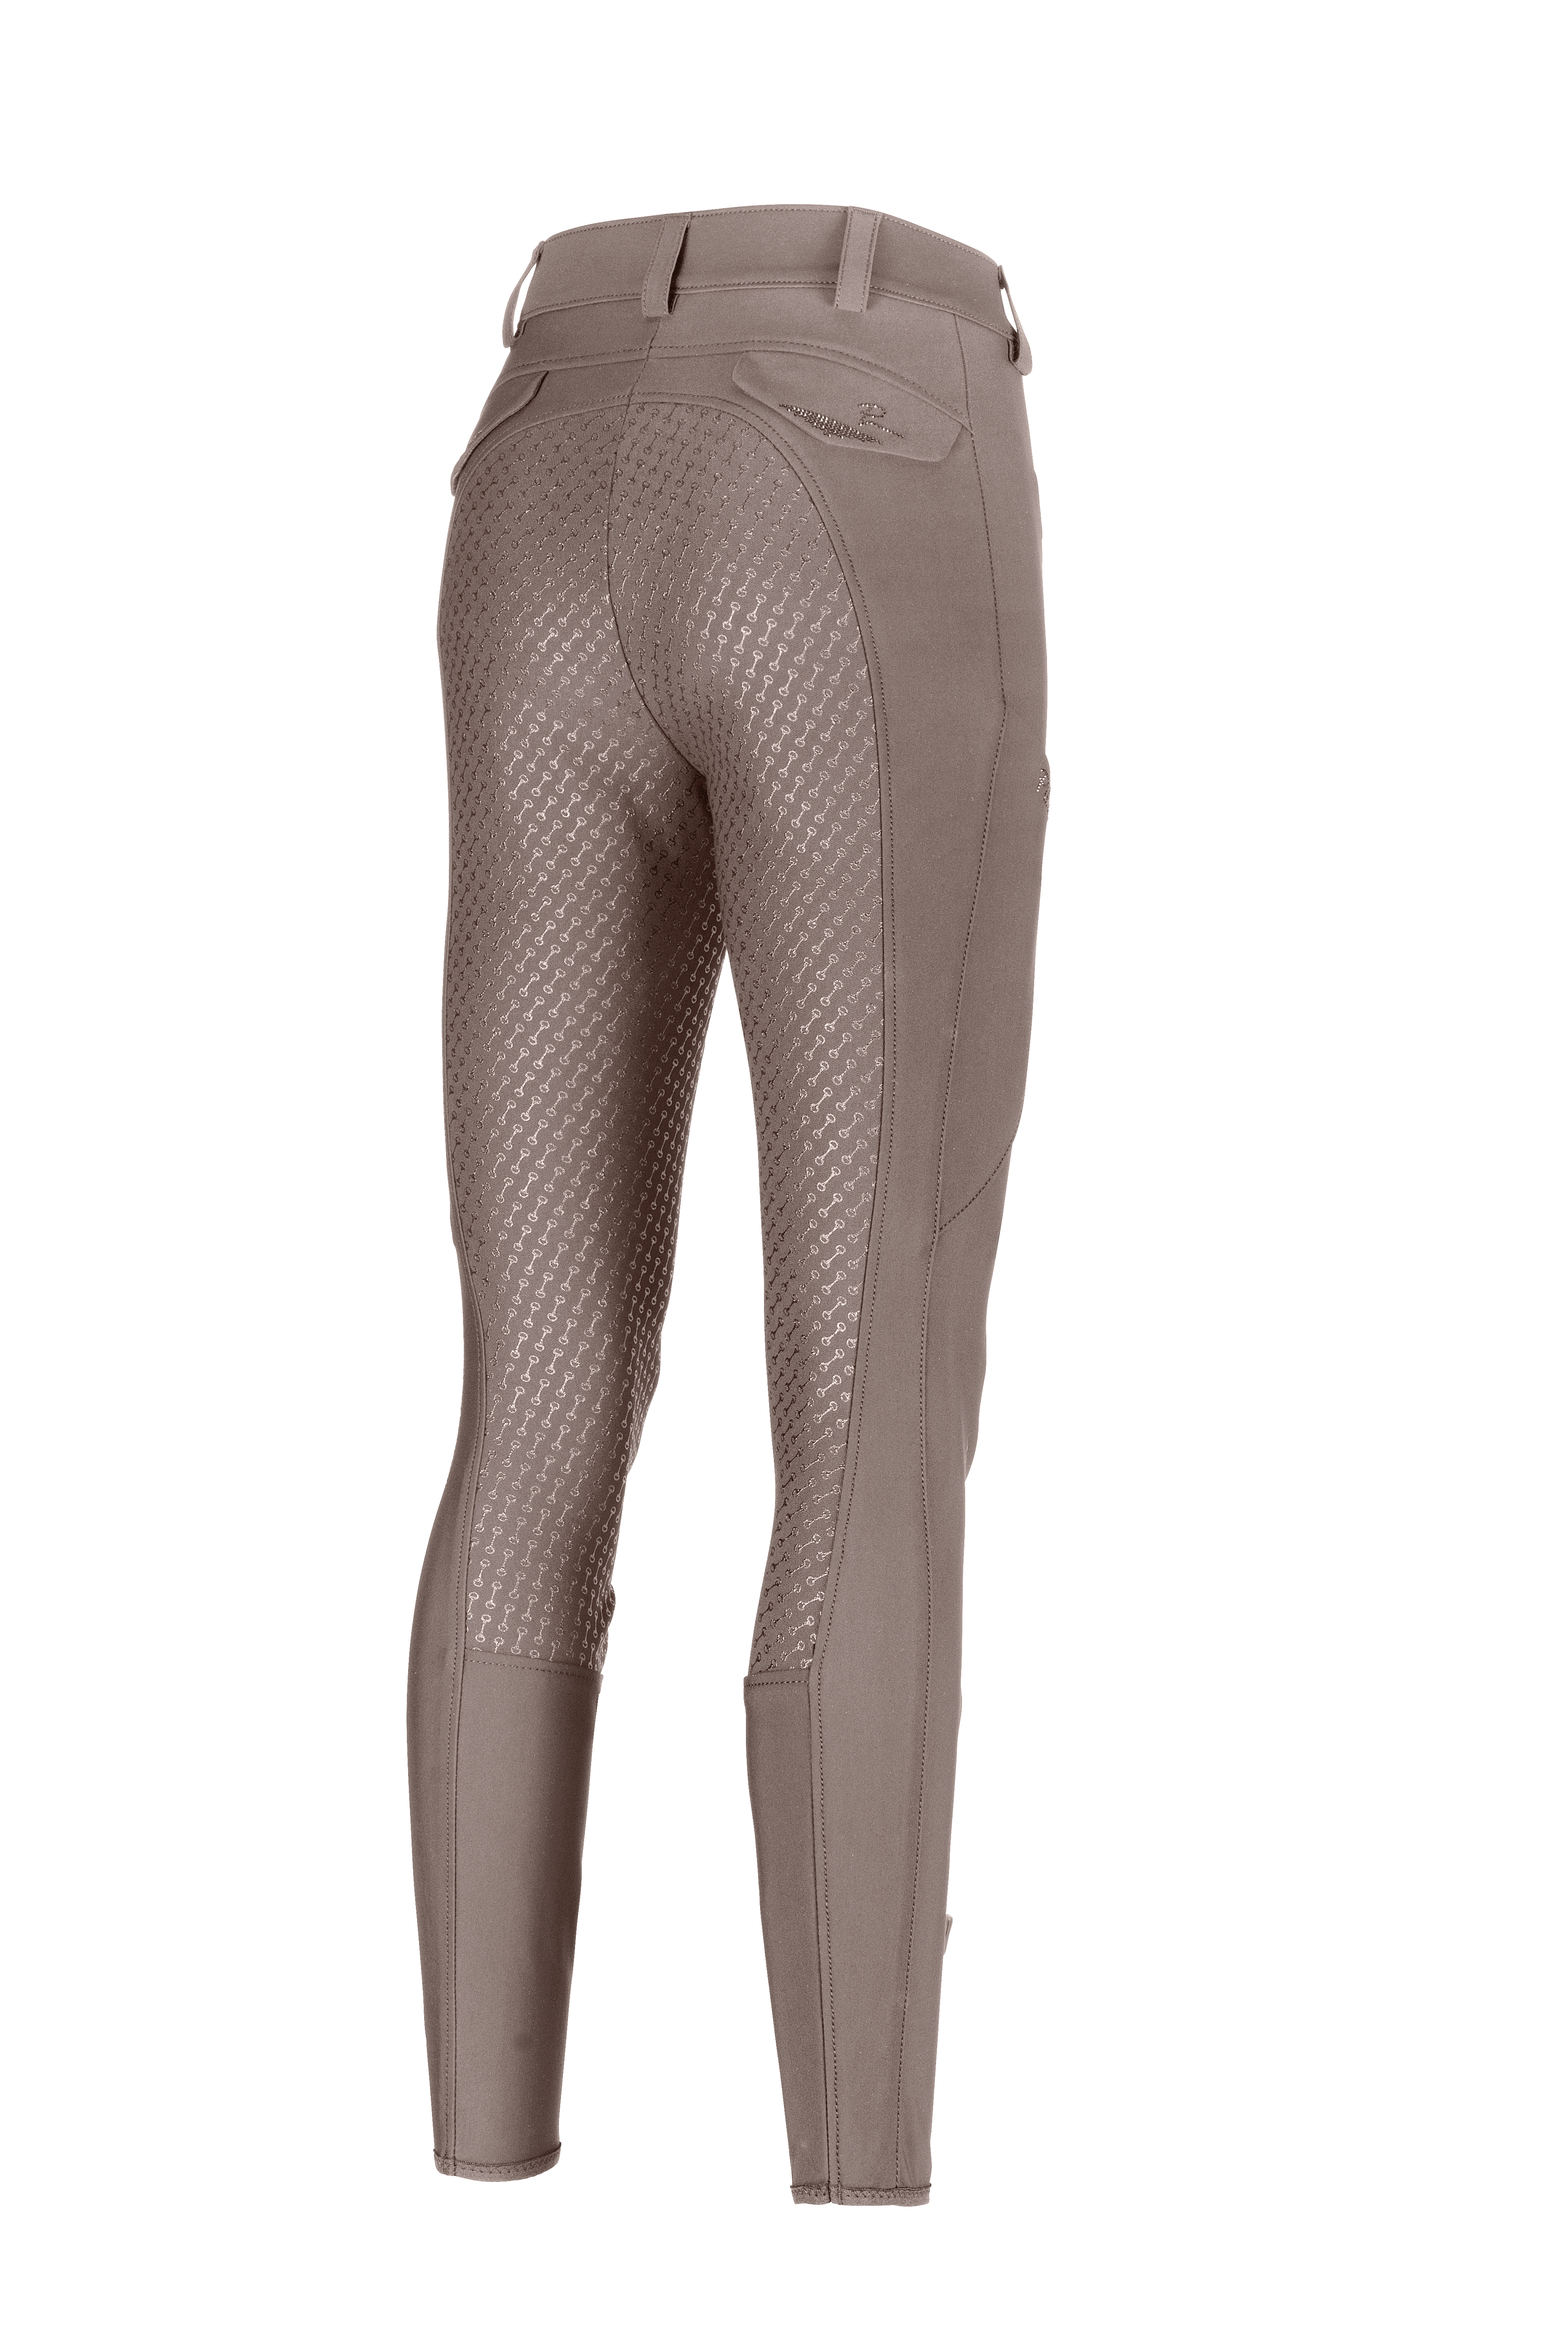 Pikeur LAURE Vollgrip Reithose, Taupe